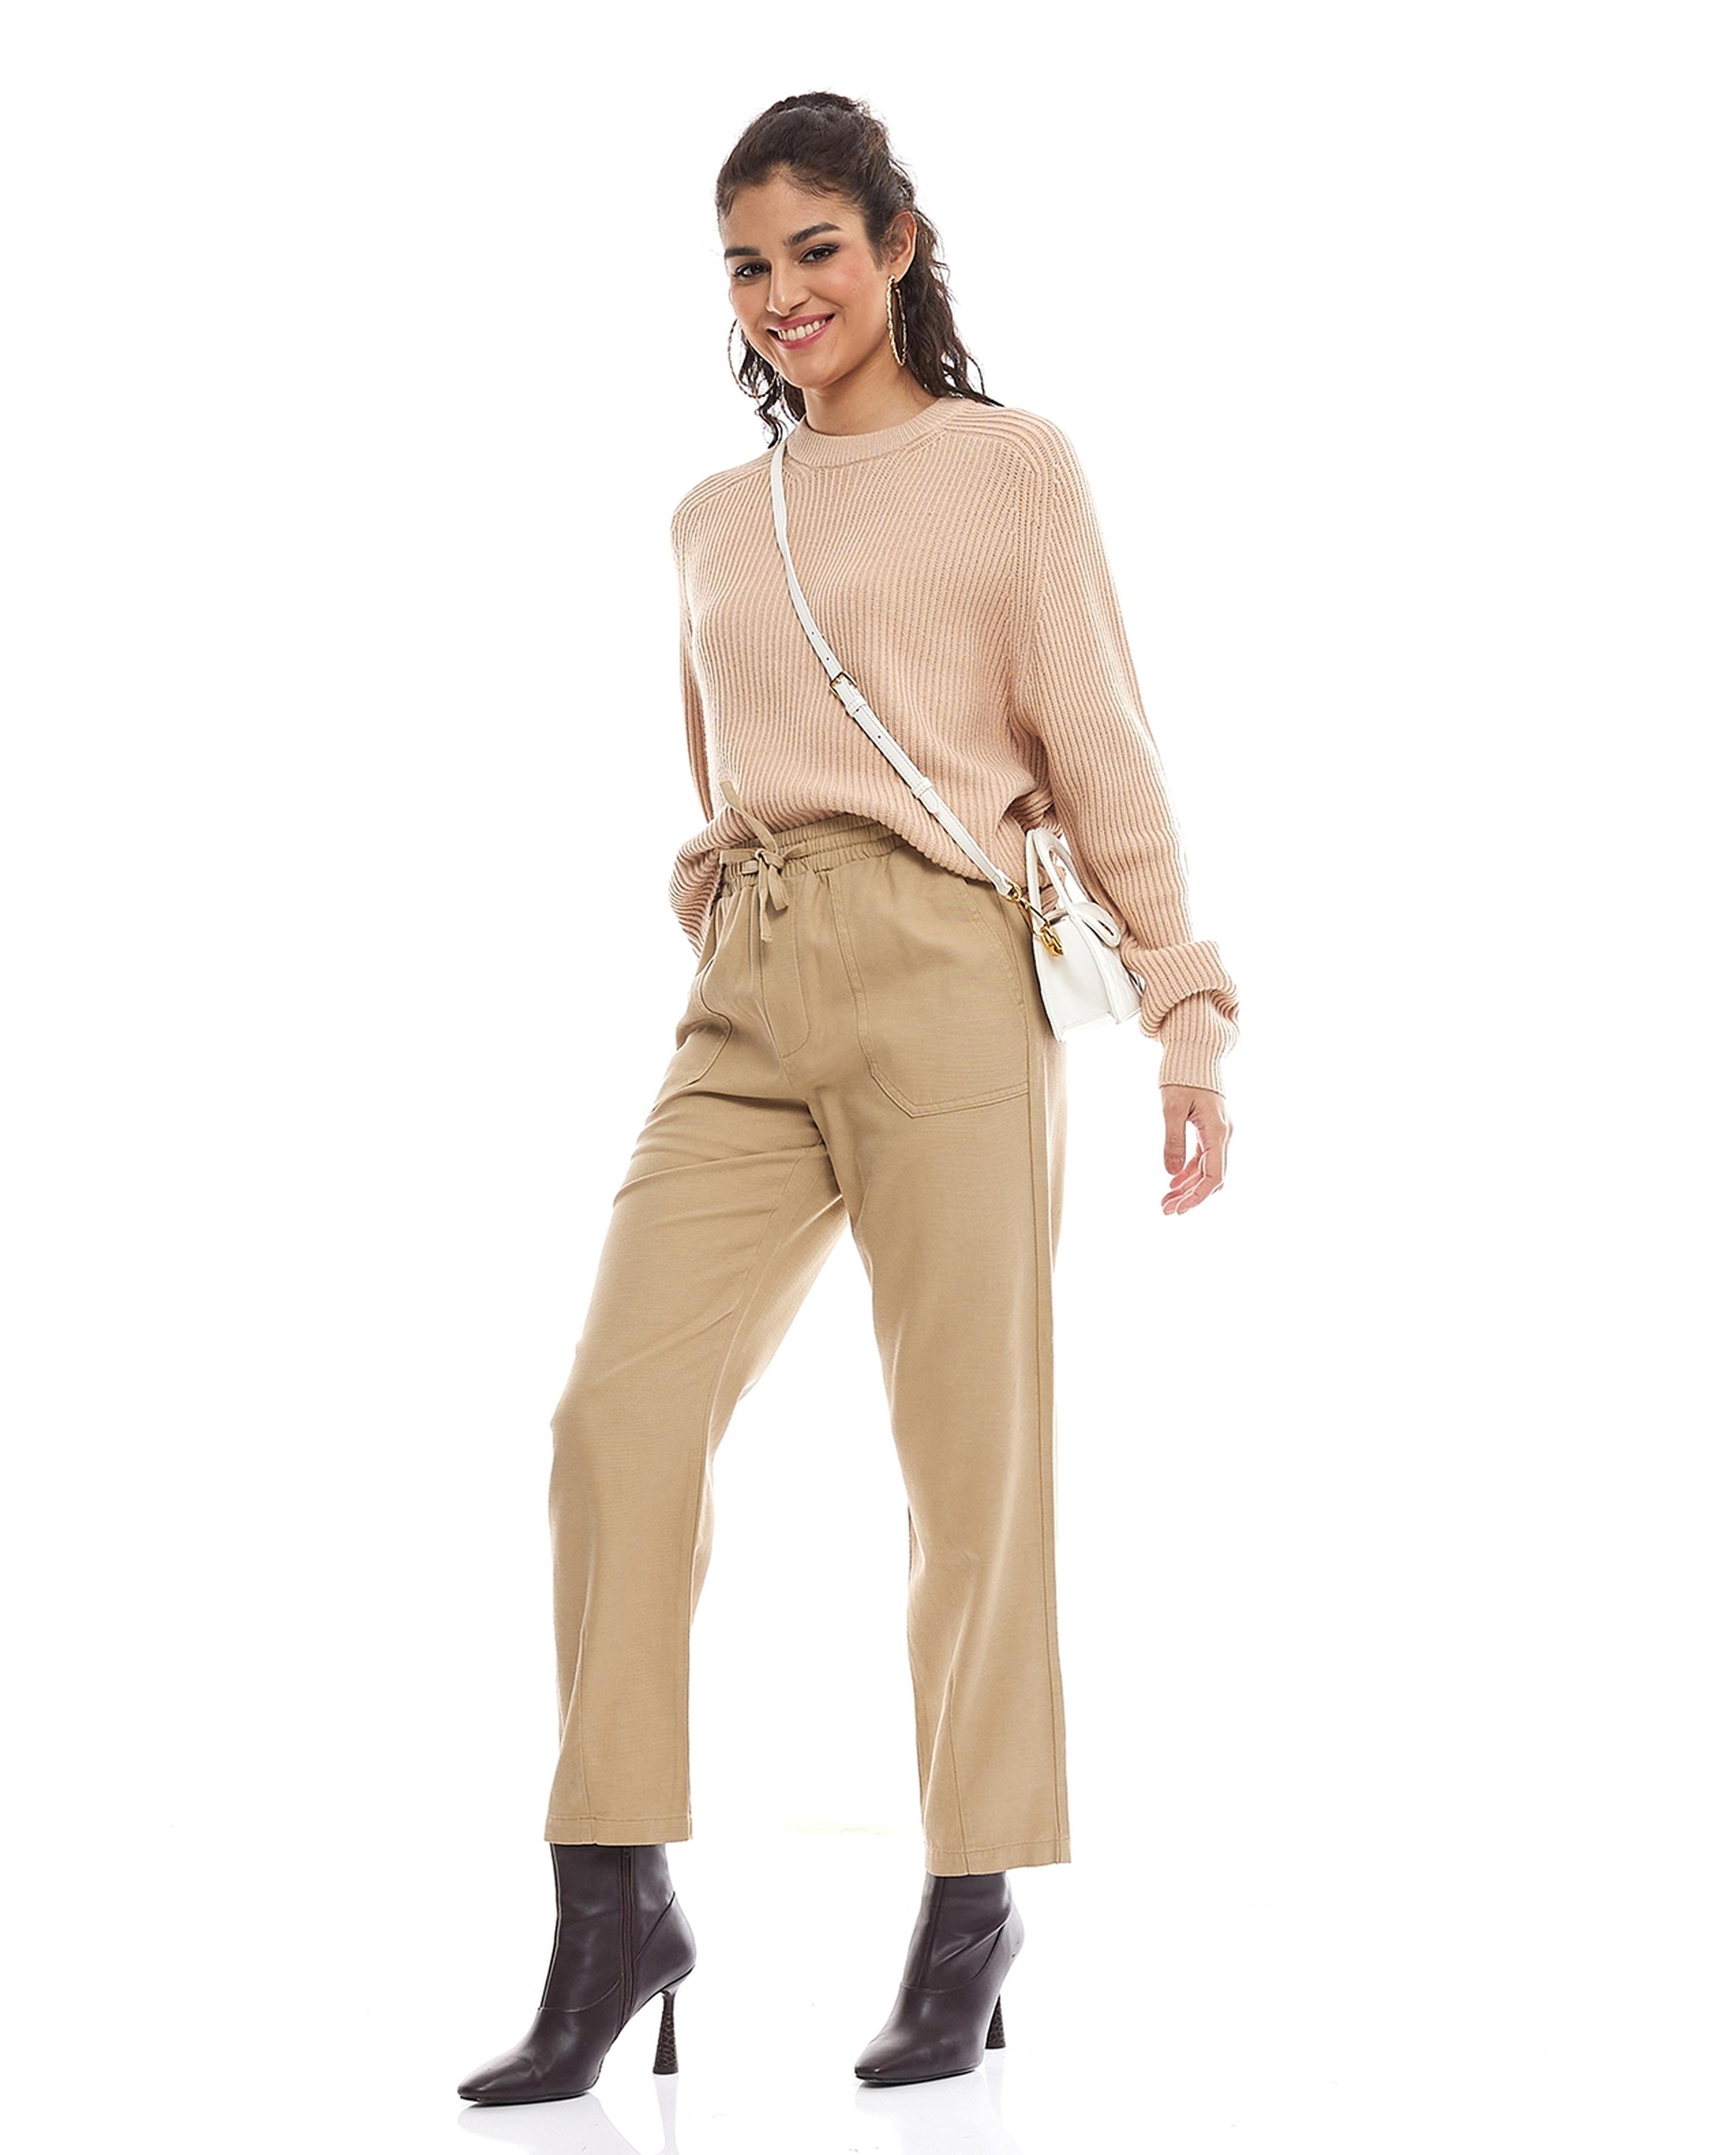 Solid Straight Fit Woven Pants with Drawstring Waist